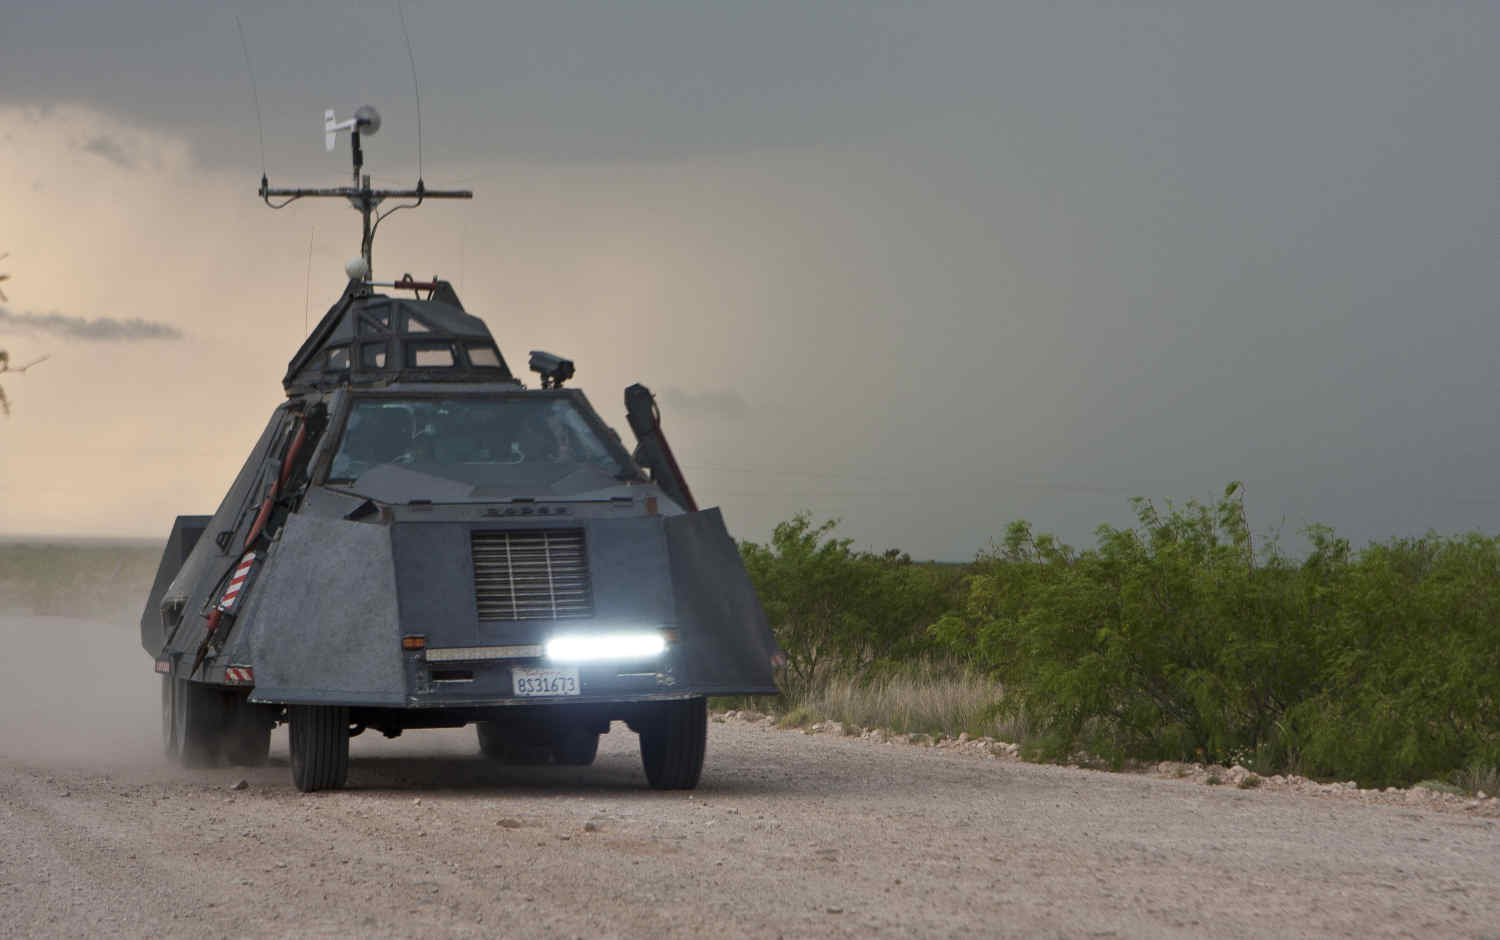 Storm chaser vehicles like this Tornado Intercept Vehicle are made of Ford trucks